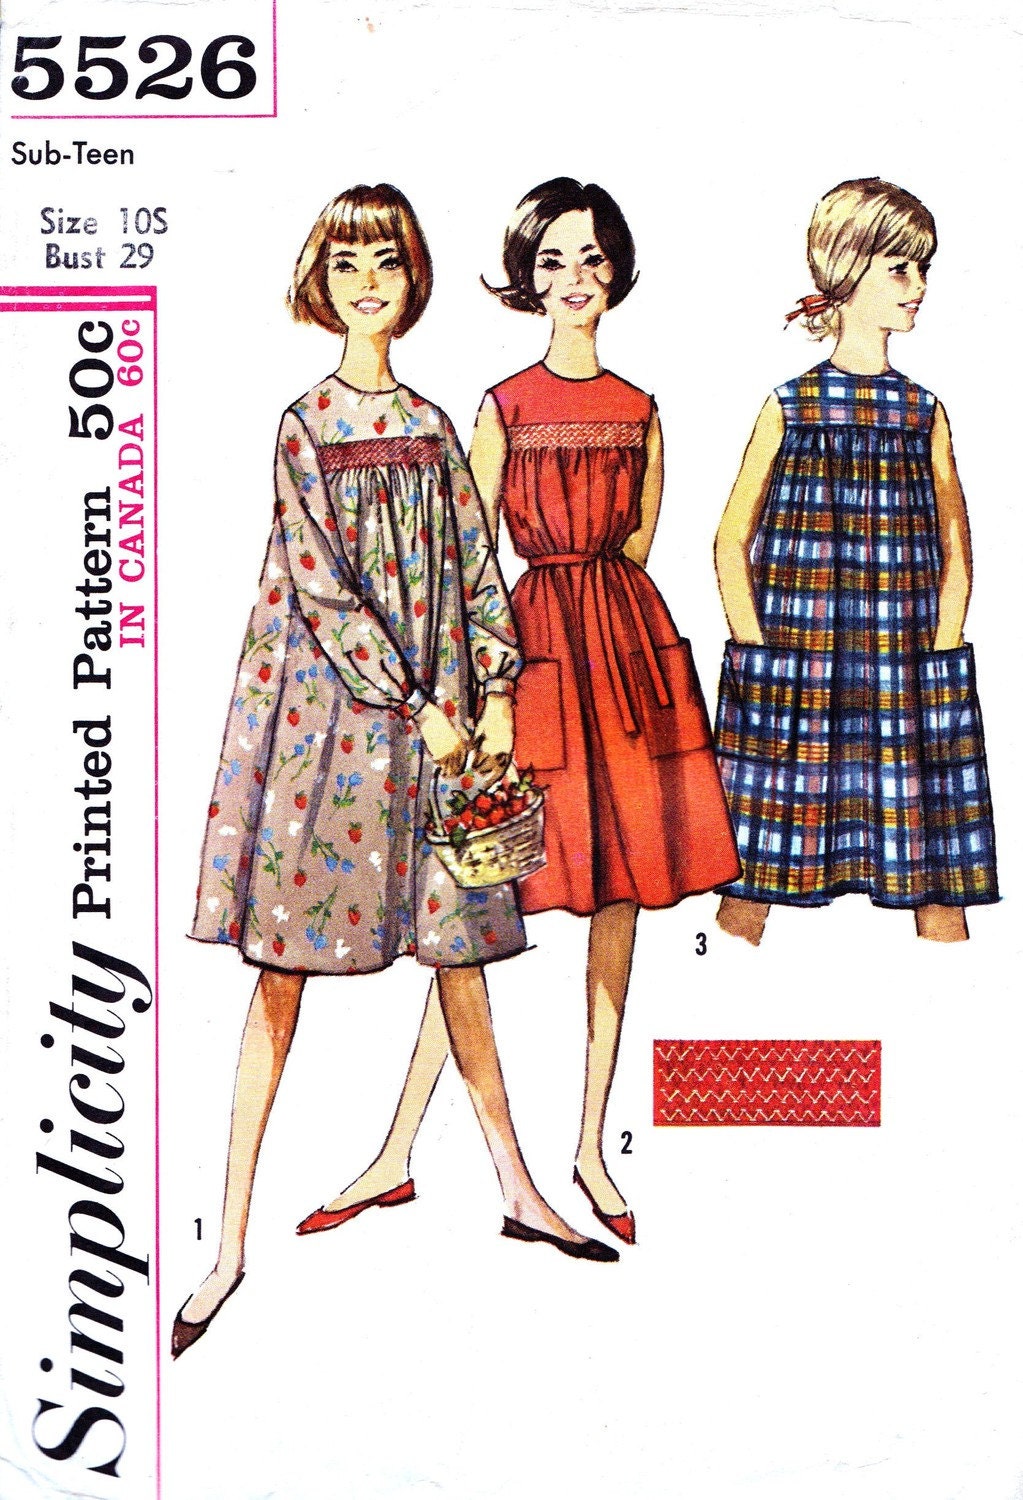 Simplicity 5526 Bust 29 Sub Teen One Piece Dress with Smocking Transfer c